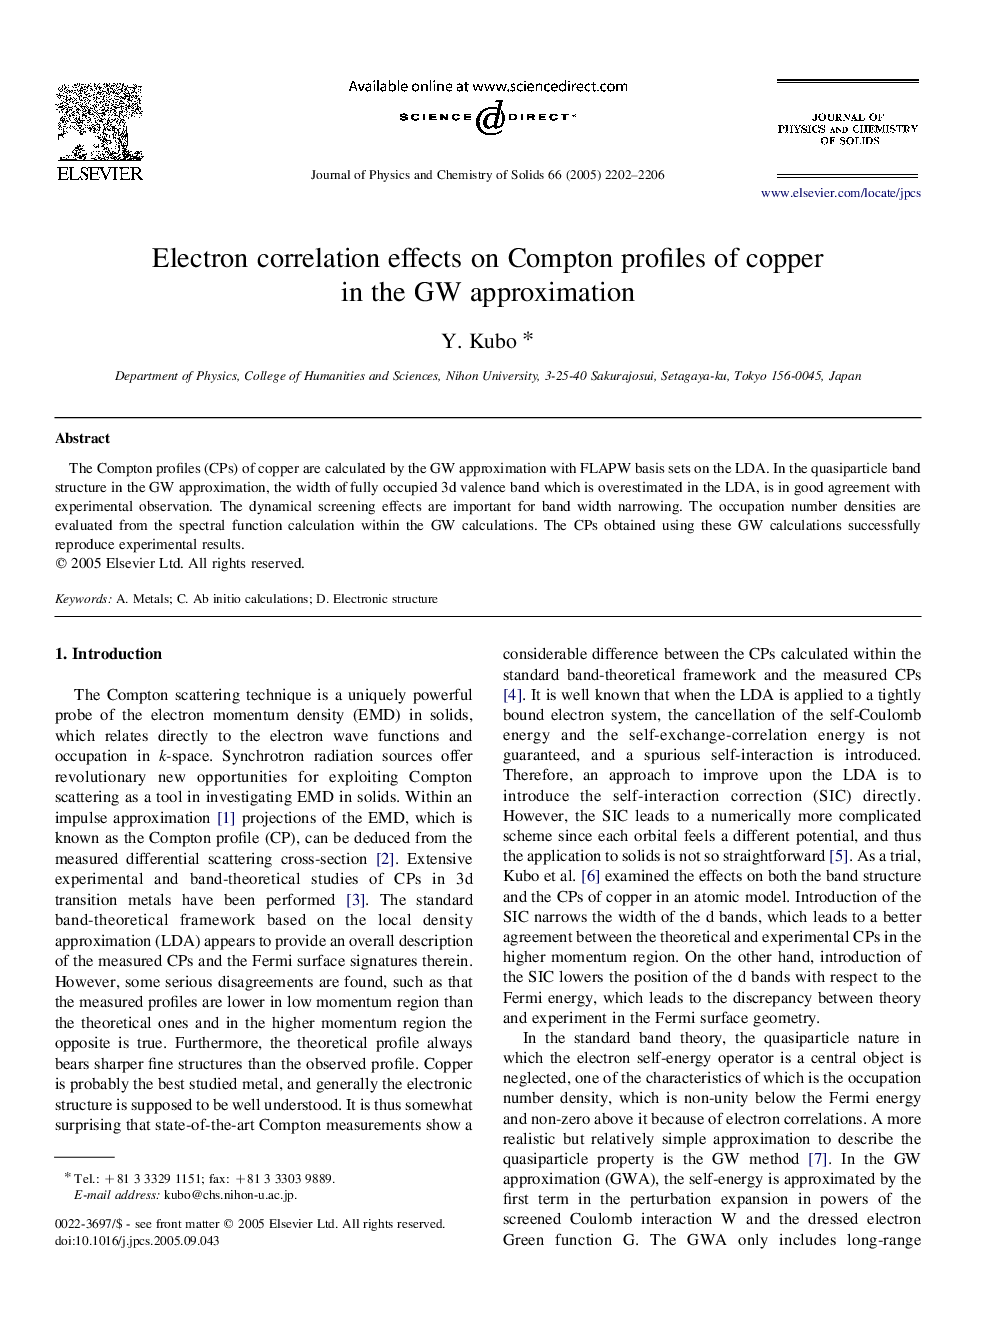 Electron correlation effects on Compton profiles of copper in the GW approximation